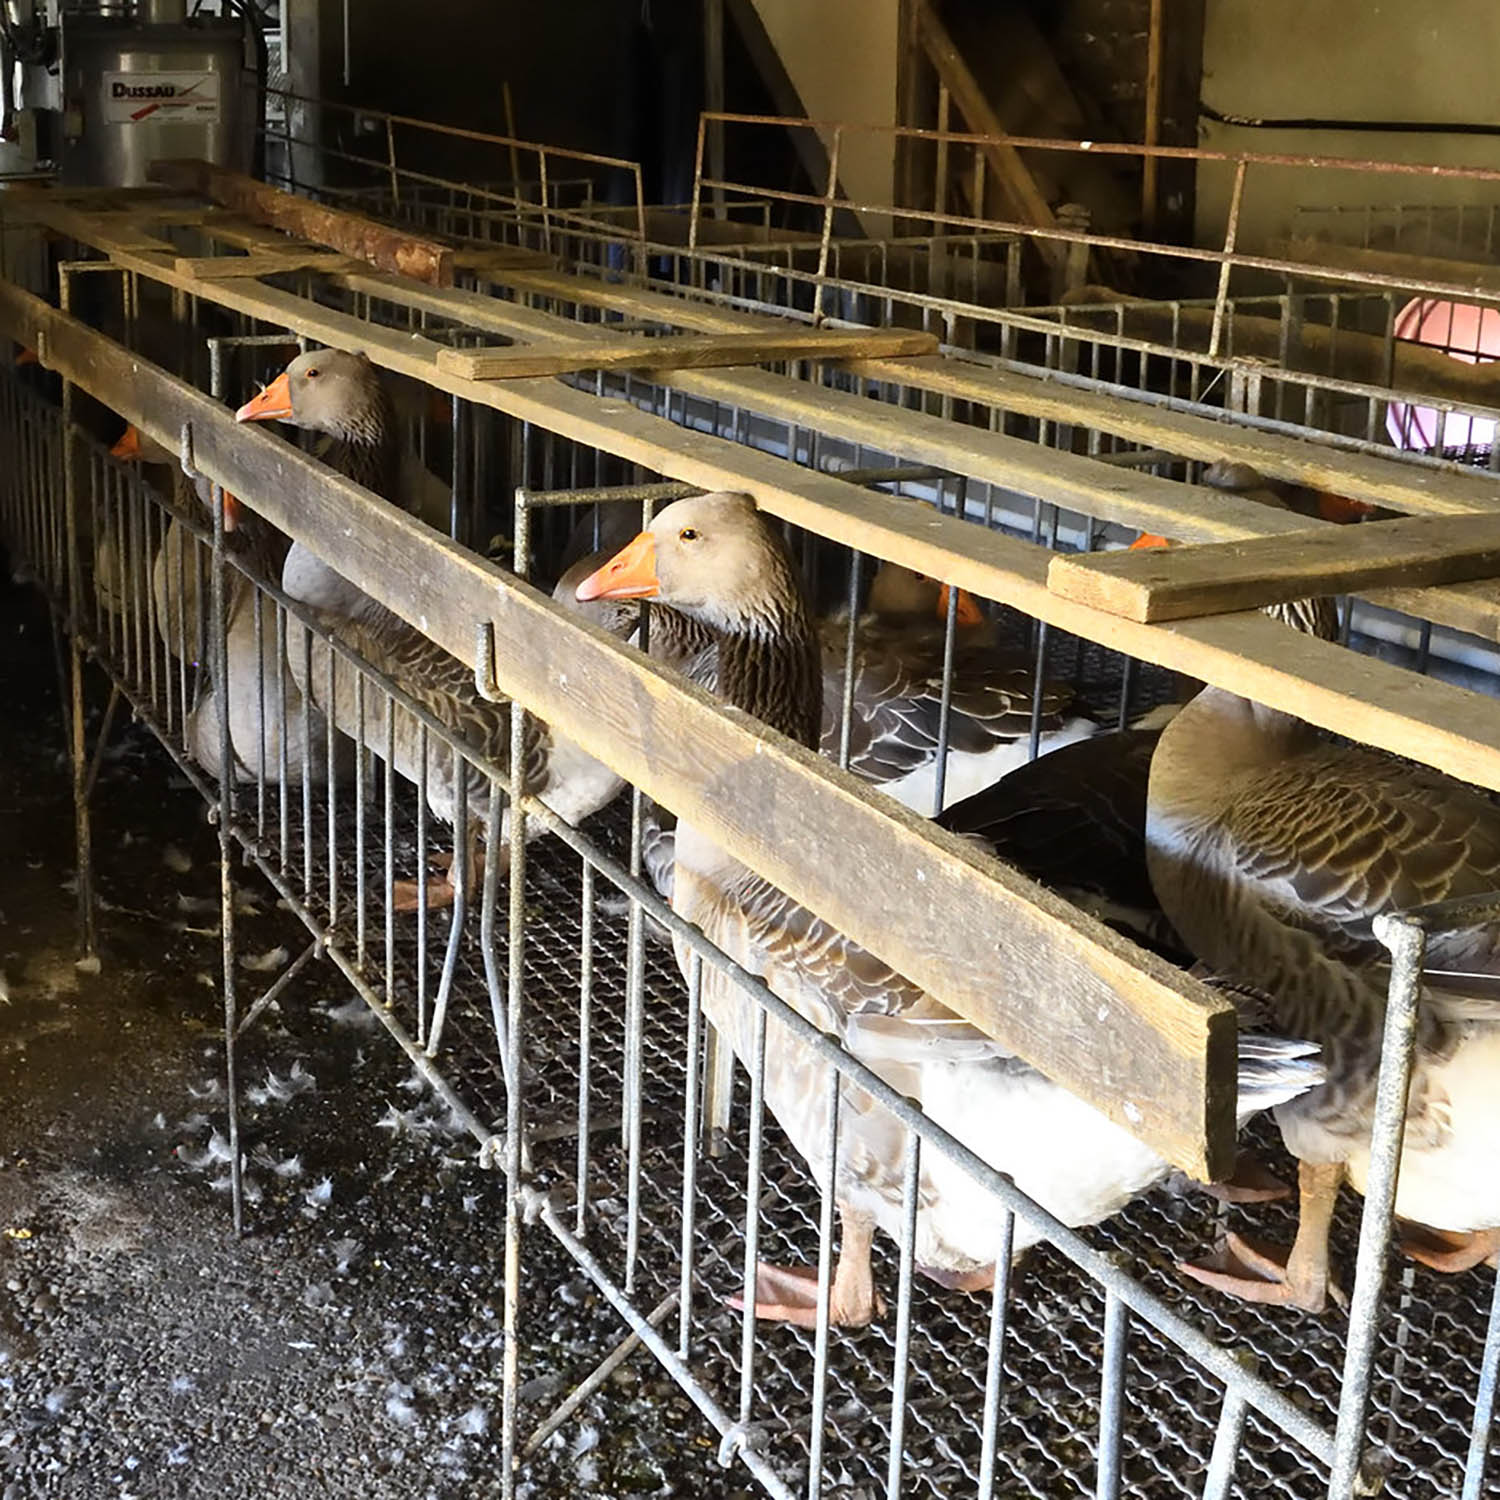 Geese for foie gras production